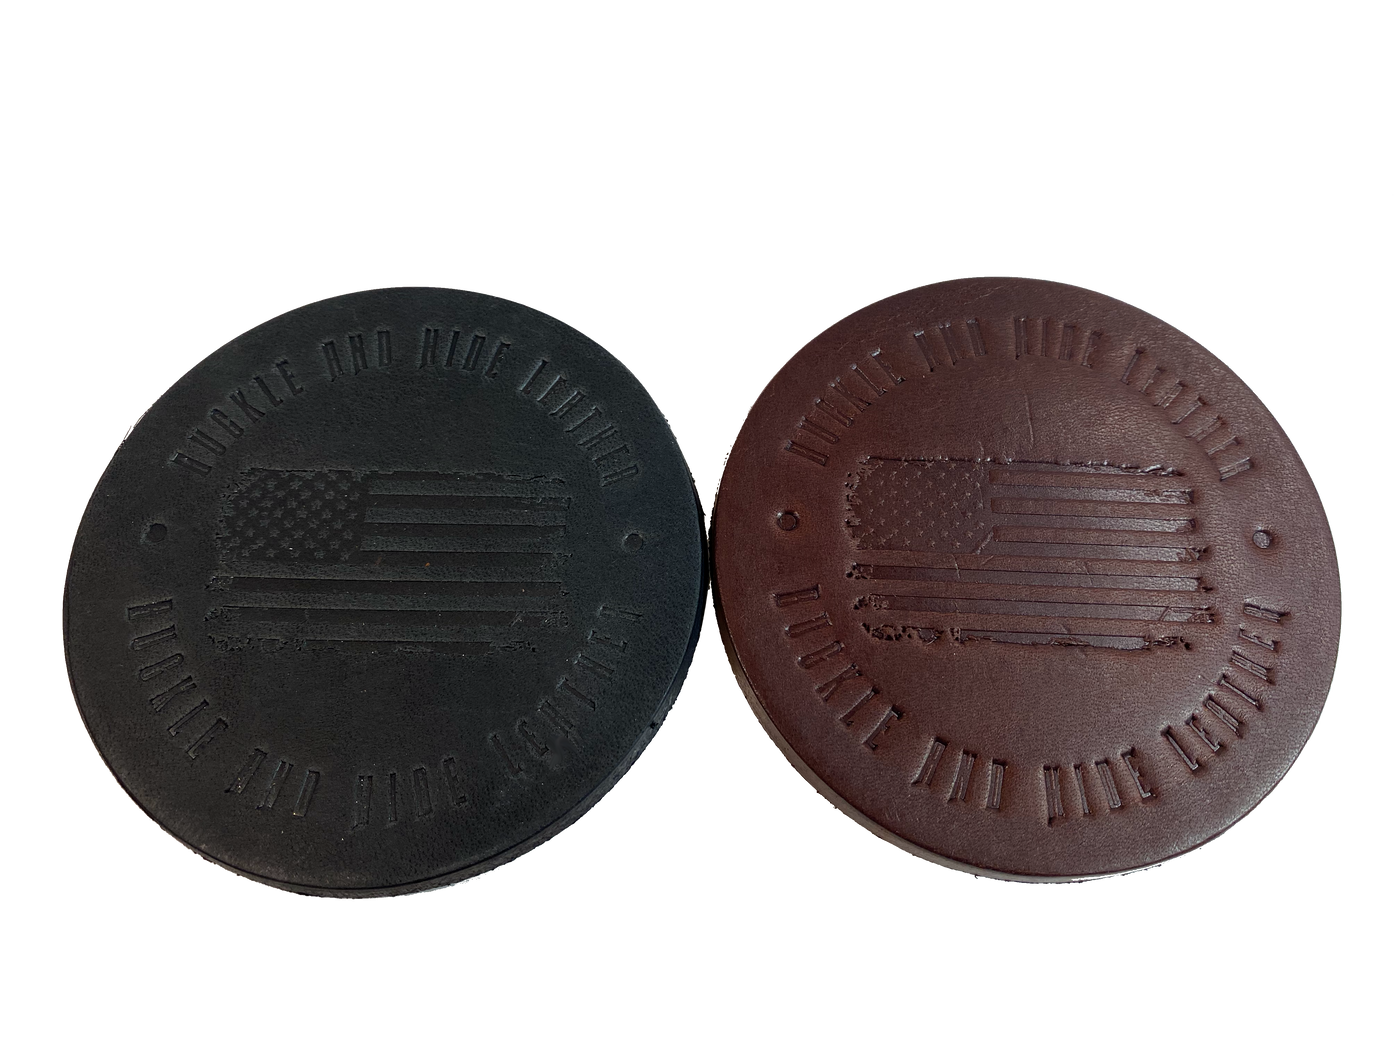 Made in our shop from Approx. 1/8" thick bridle Leather. A salute to all patriots who shop at our shop and everyone who loves America! Embossed with Buckle and Hide graphics and a vintage American Flag. Choose Black or Med. Brown. Purchase individually or in a custom tin. BUY MORE and SAVE! Not pictured yet!